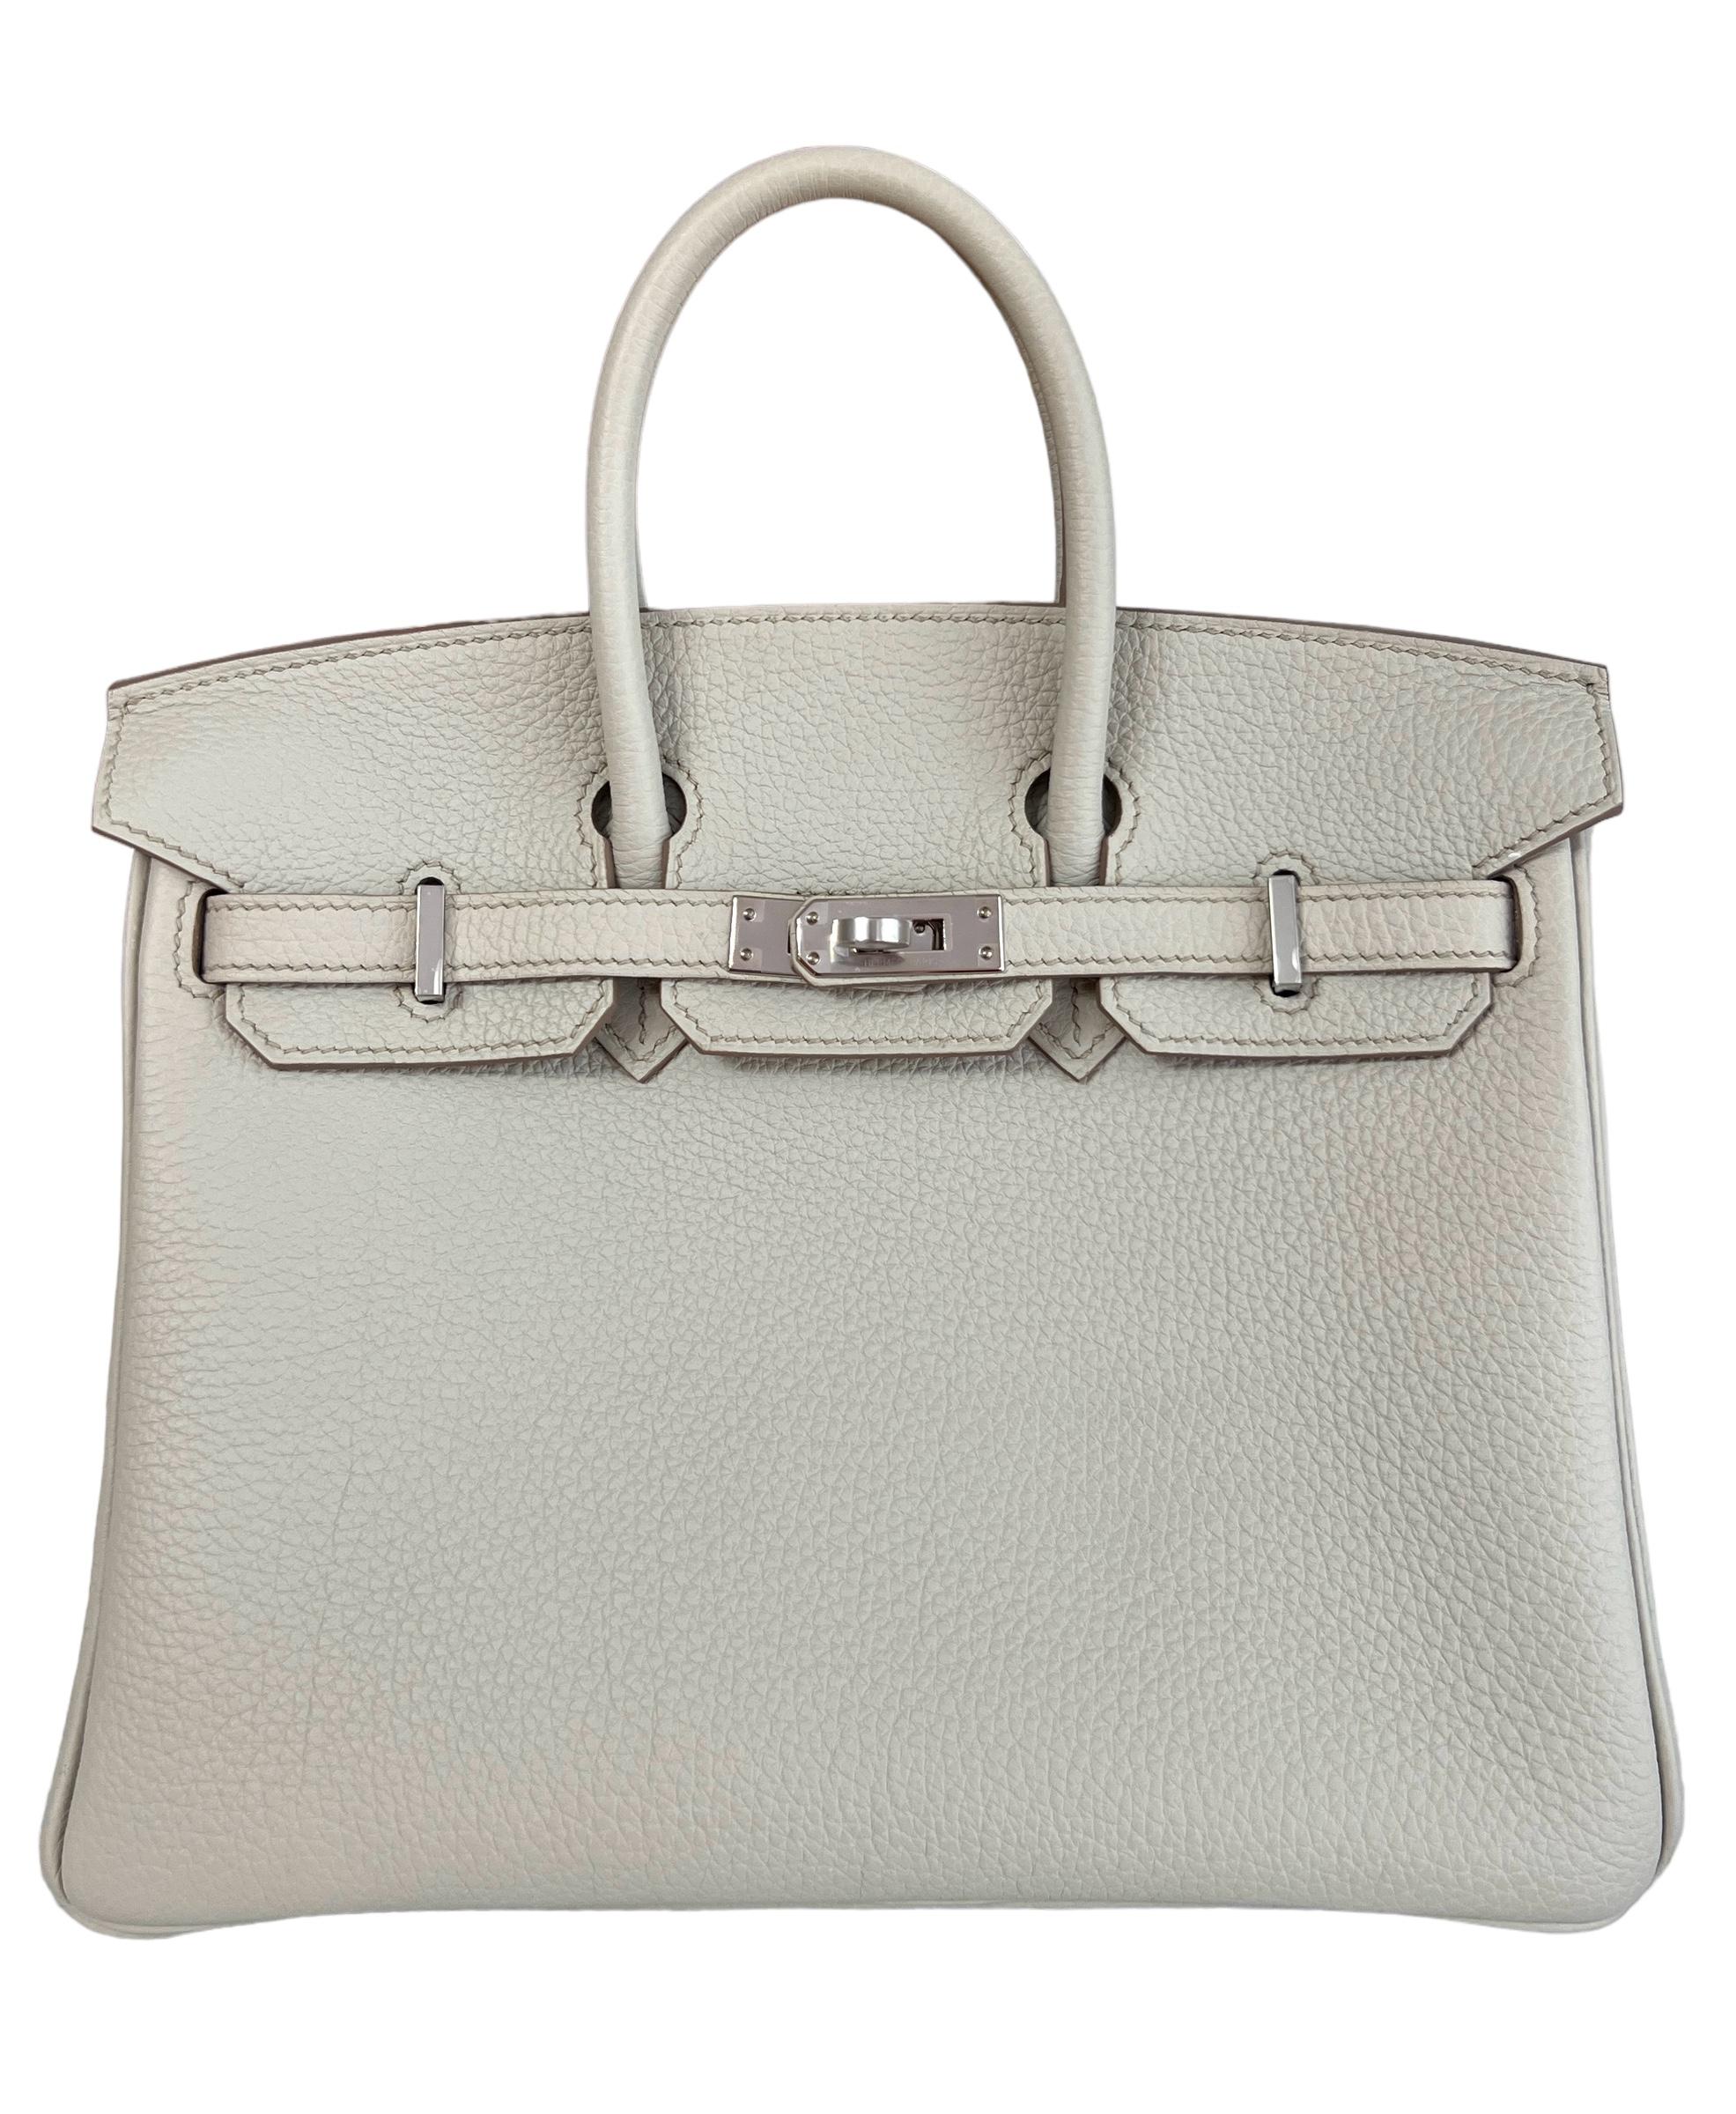 Absolutely Stunning and One The Most Coveted and Difficult to get Hermes Combos! As New Hermes Birkin 25 Beton Togo Leather complimented by Palladium Hardware. As New Plastic on all Hardware and Feet. U Stamp 2022. 

Shop with Confidence from Lux